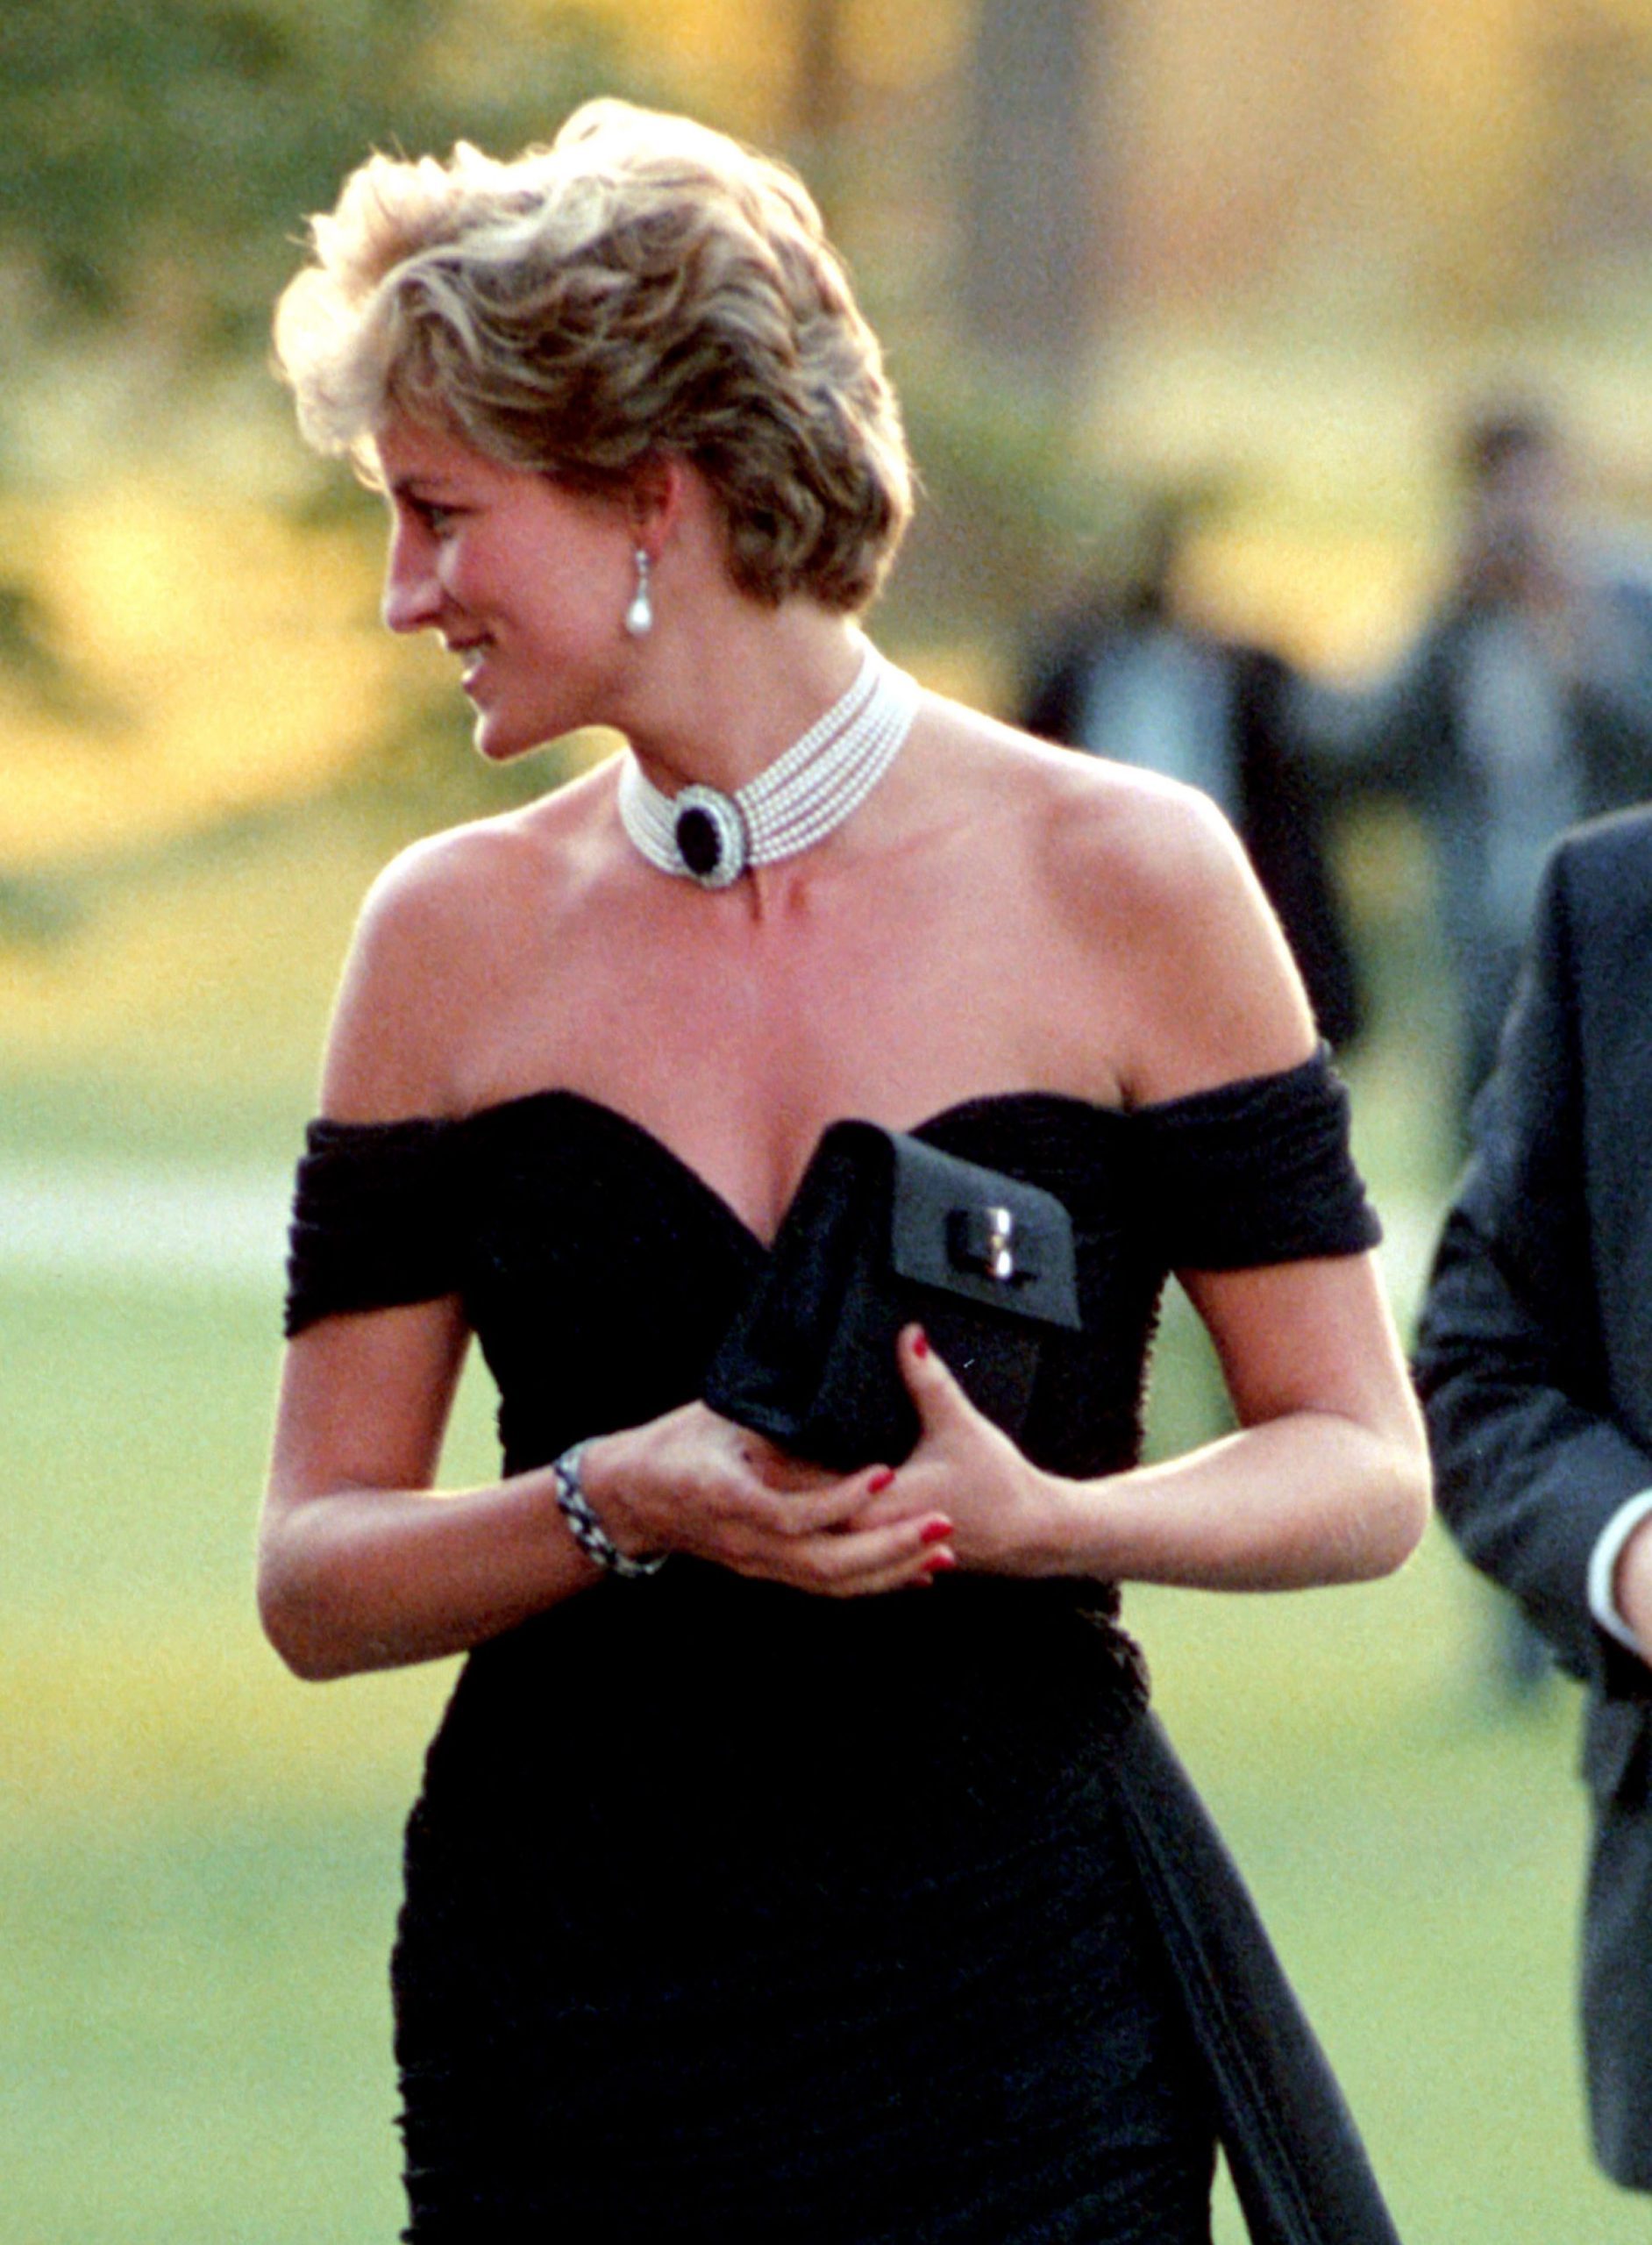 You're Wrong About on X: Monday: PRINCESS DIANA PART 5 https